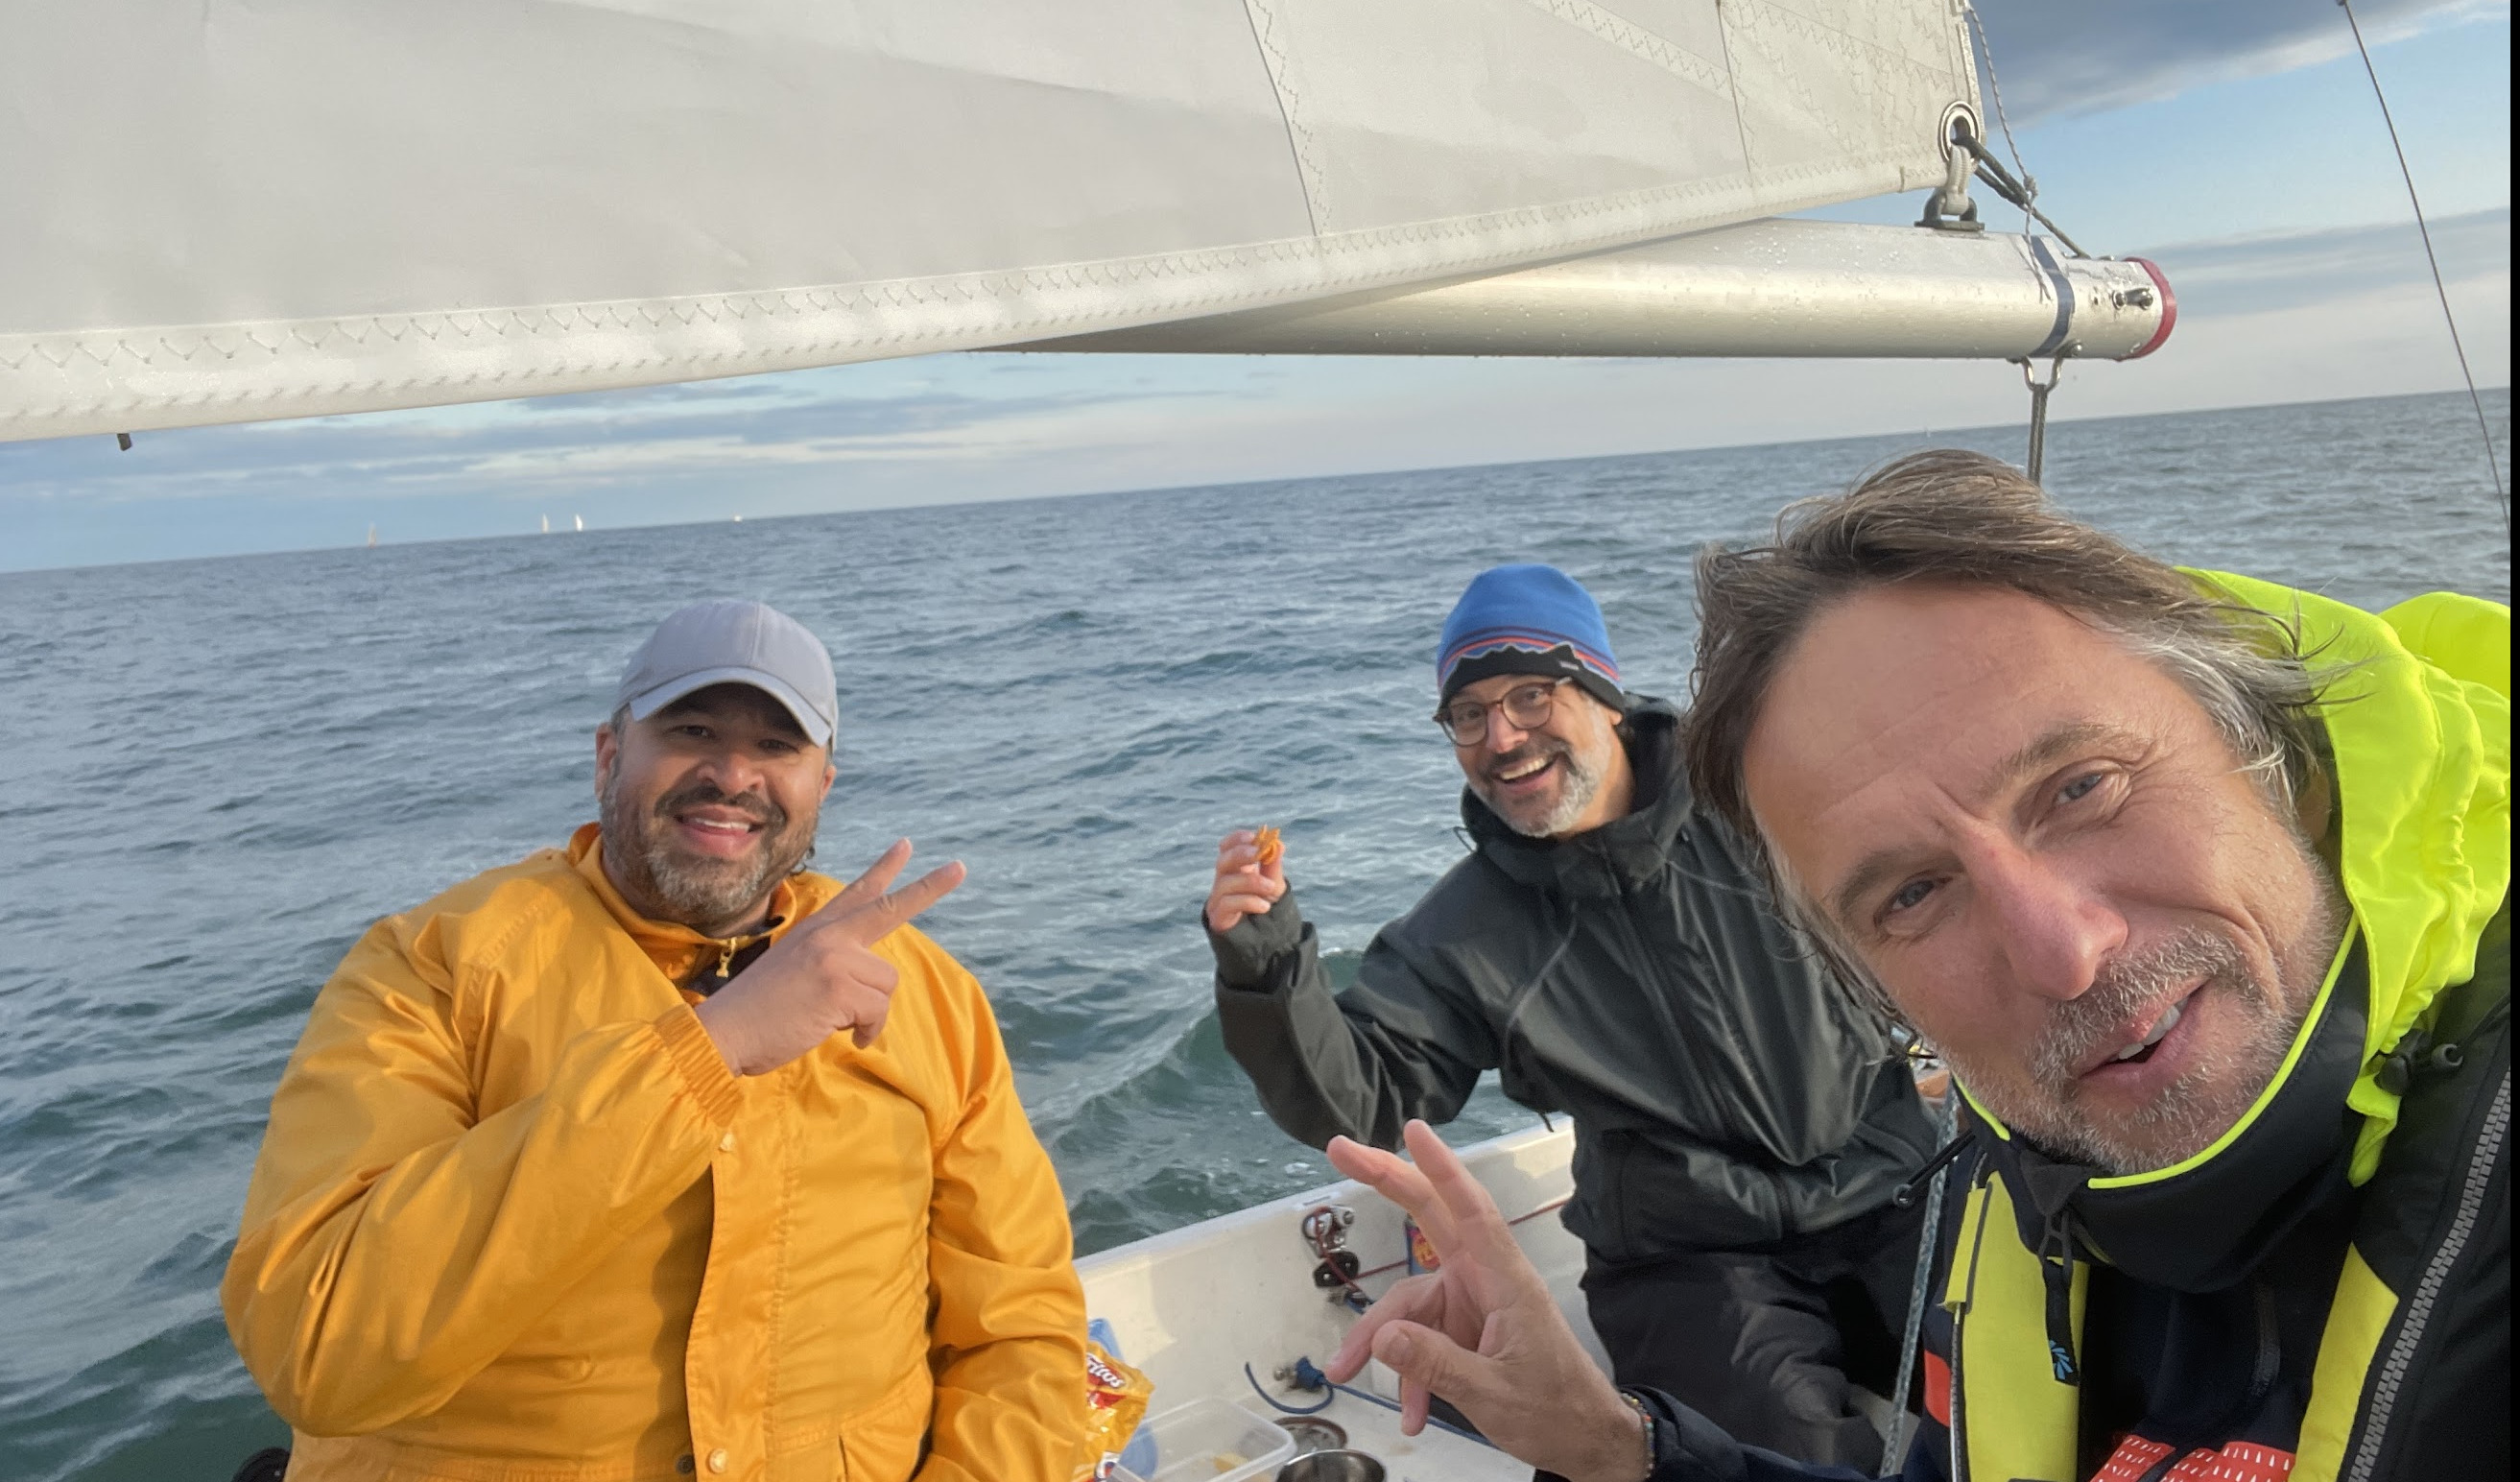 TWIS – Weeknight Races – New Sails – Learning While Teaching – Spinnaker Training